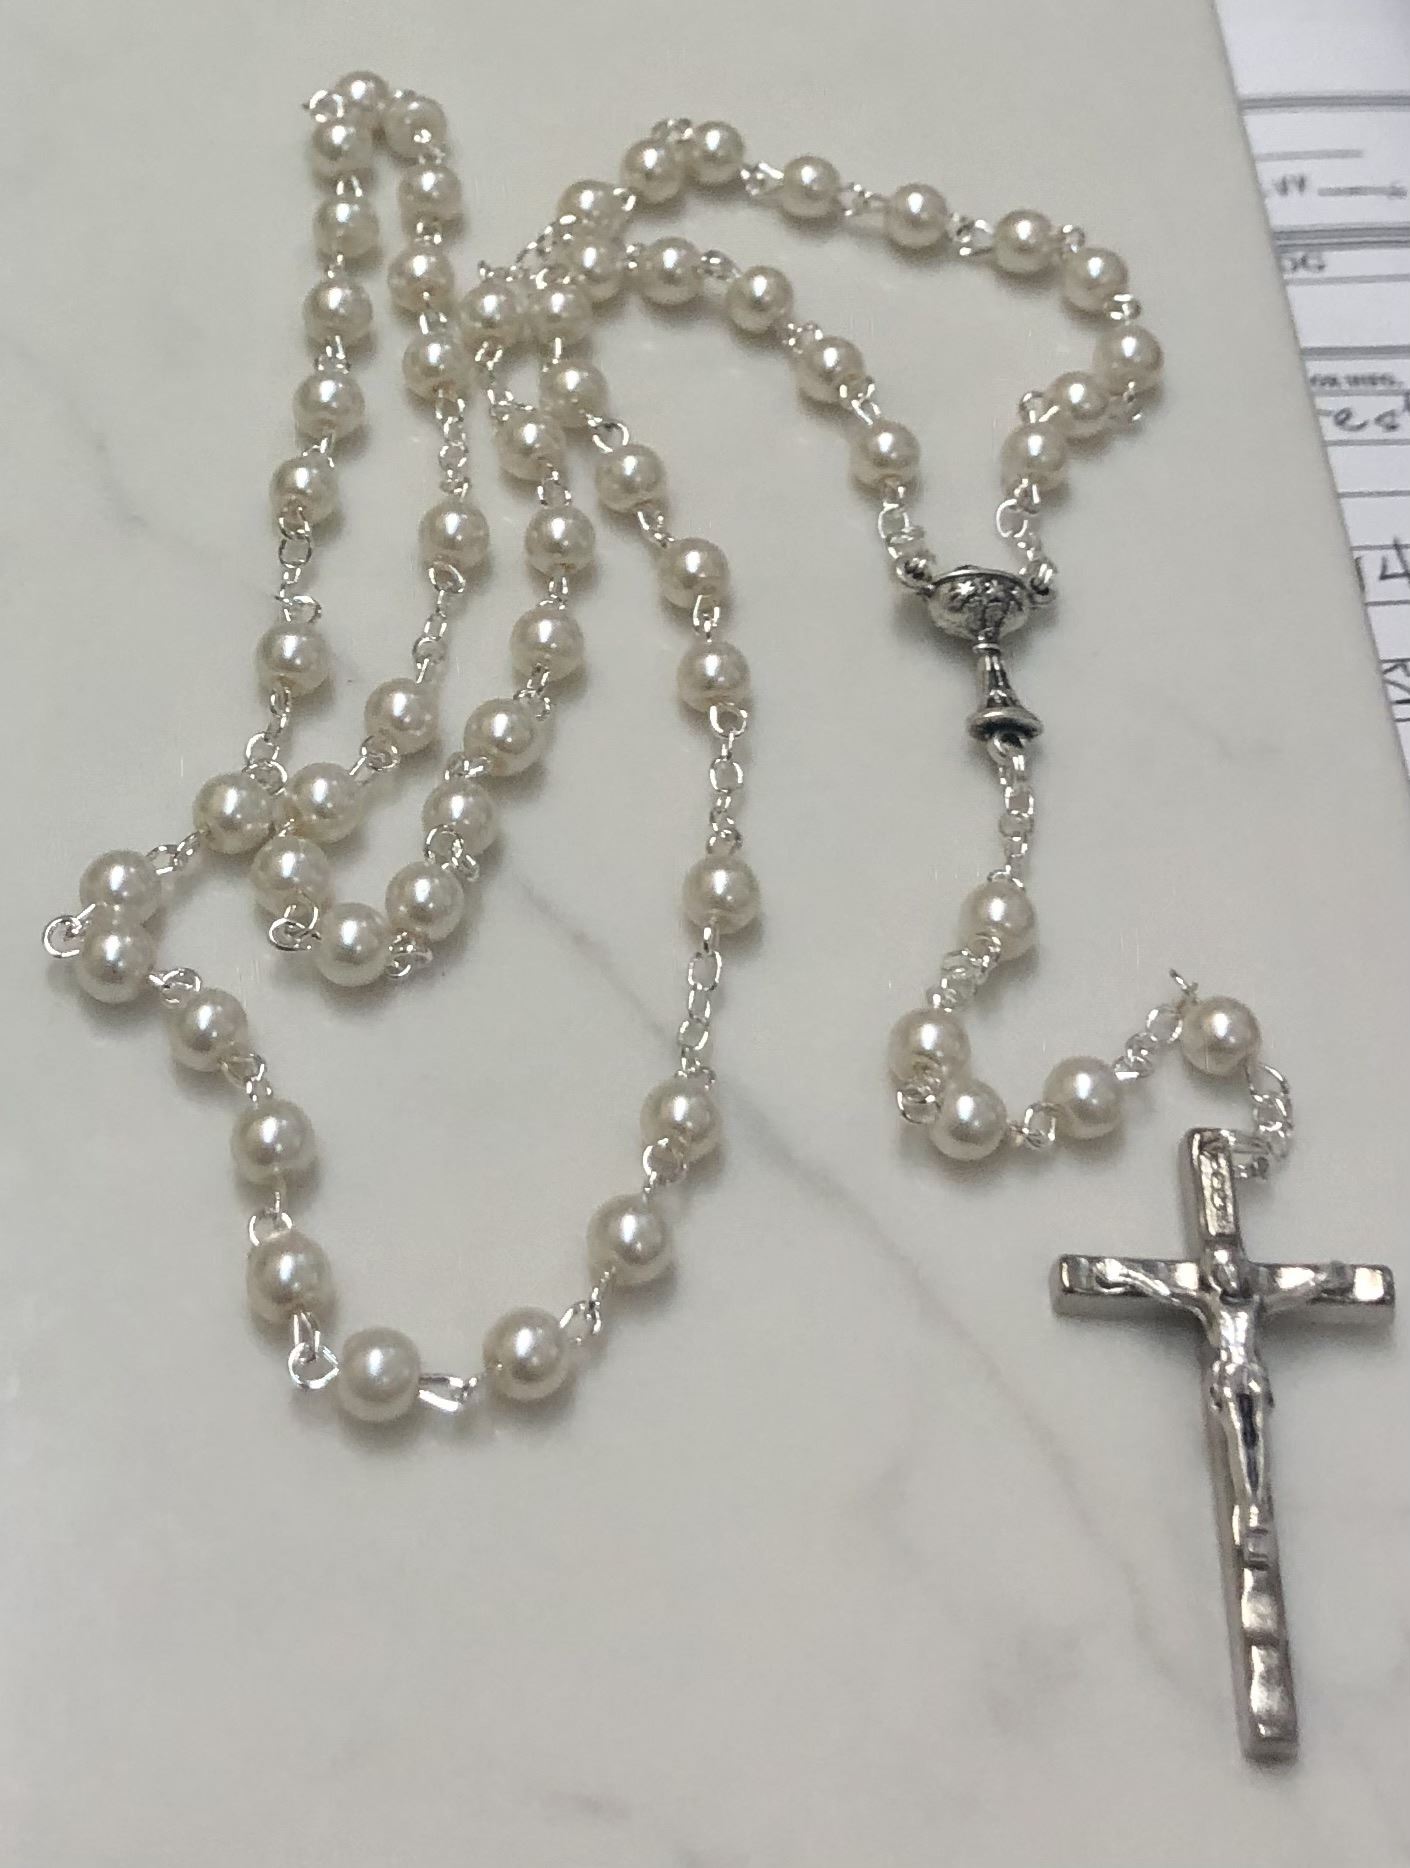 Pearl Rosary with First Communion Chalice Centerpiece from Italy